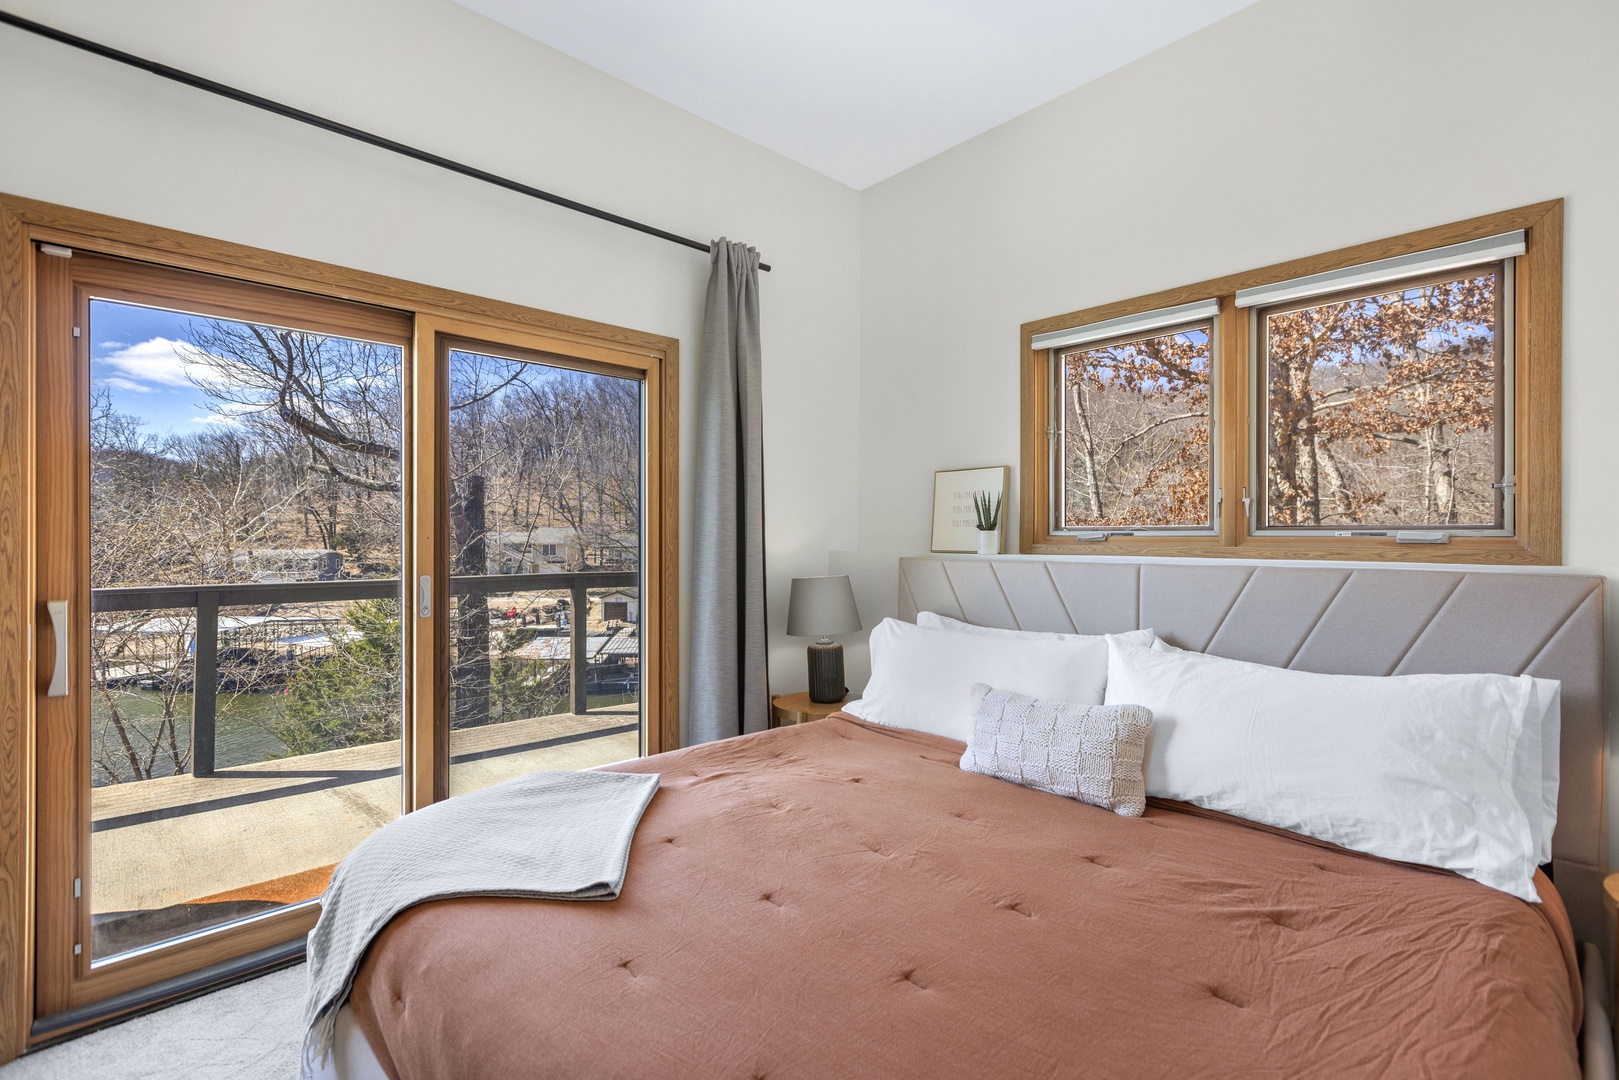 This serene bedroom includes a cozy king bed & deck access